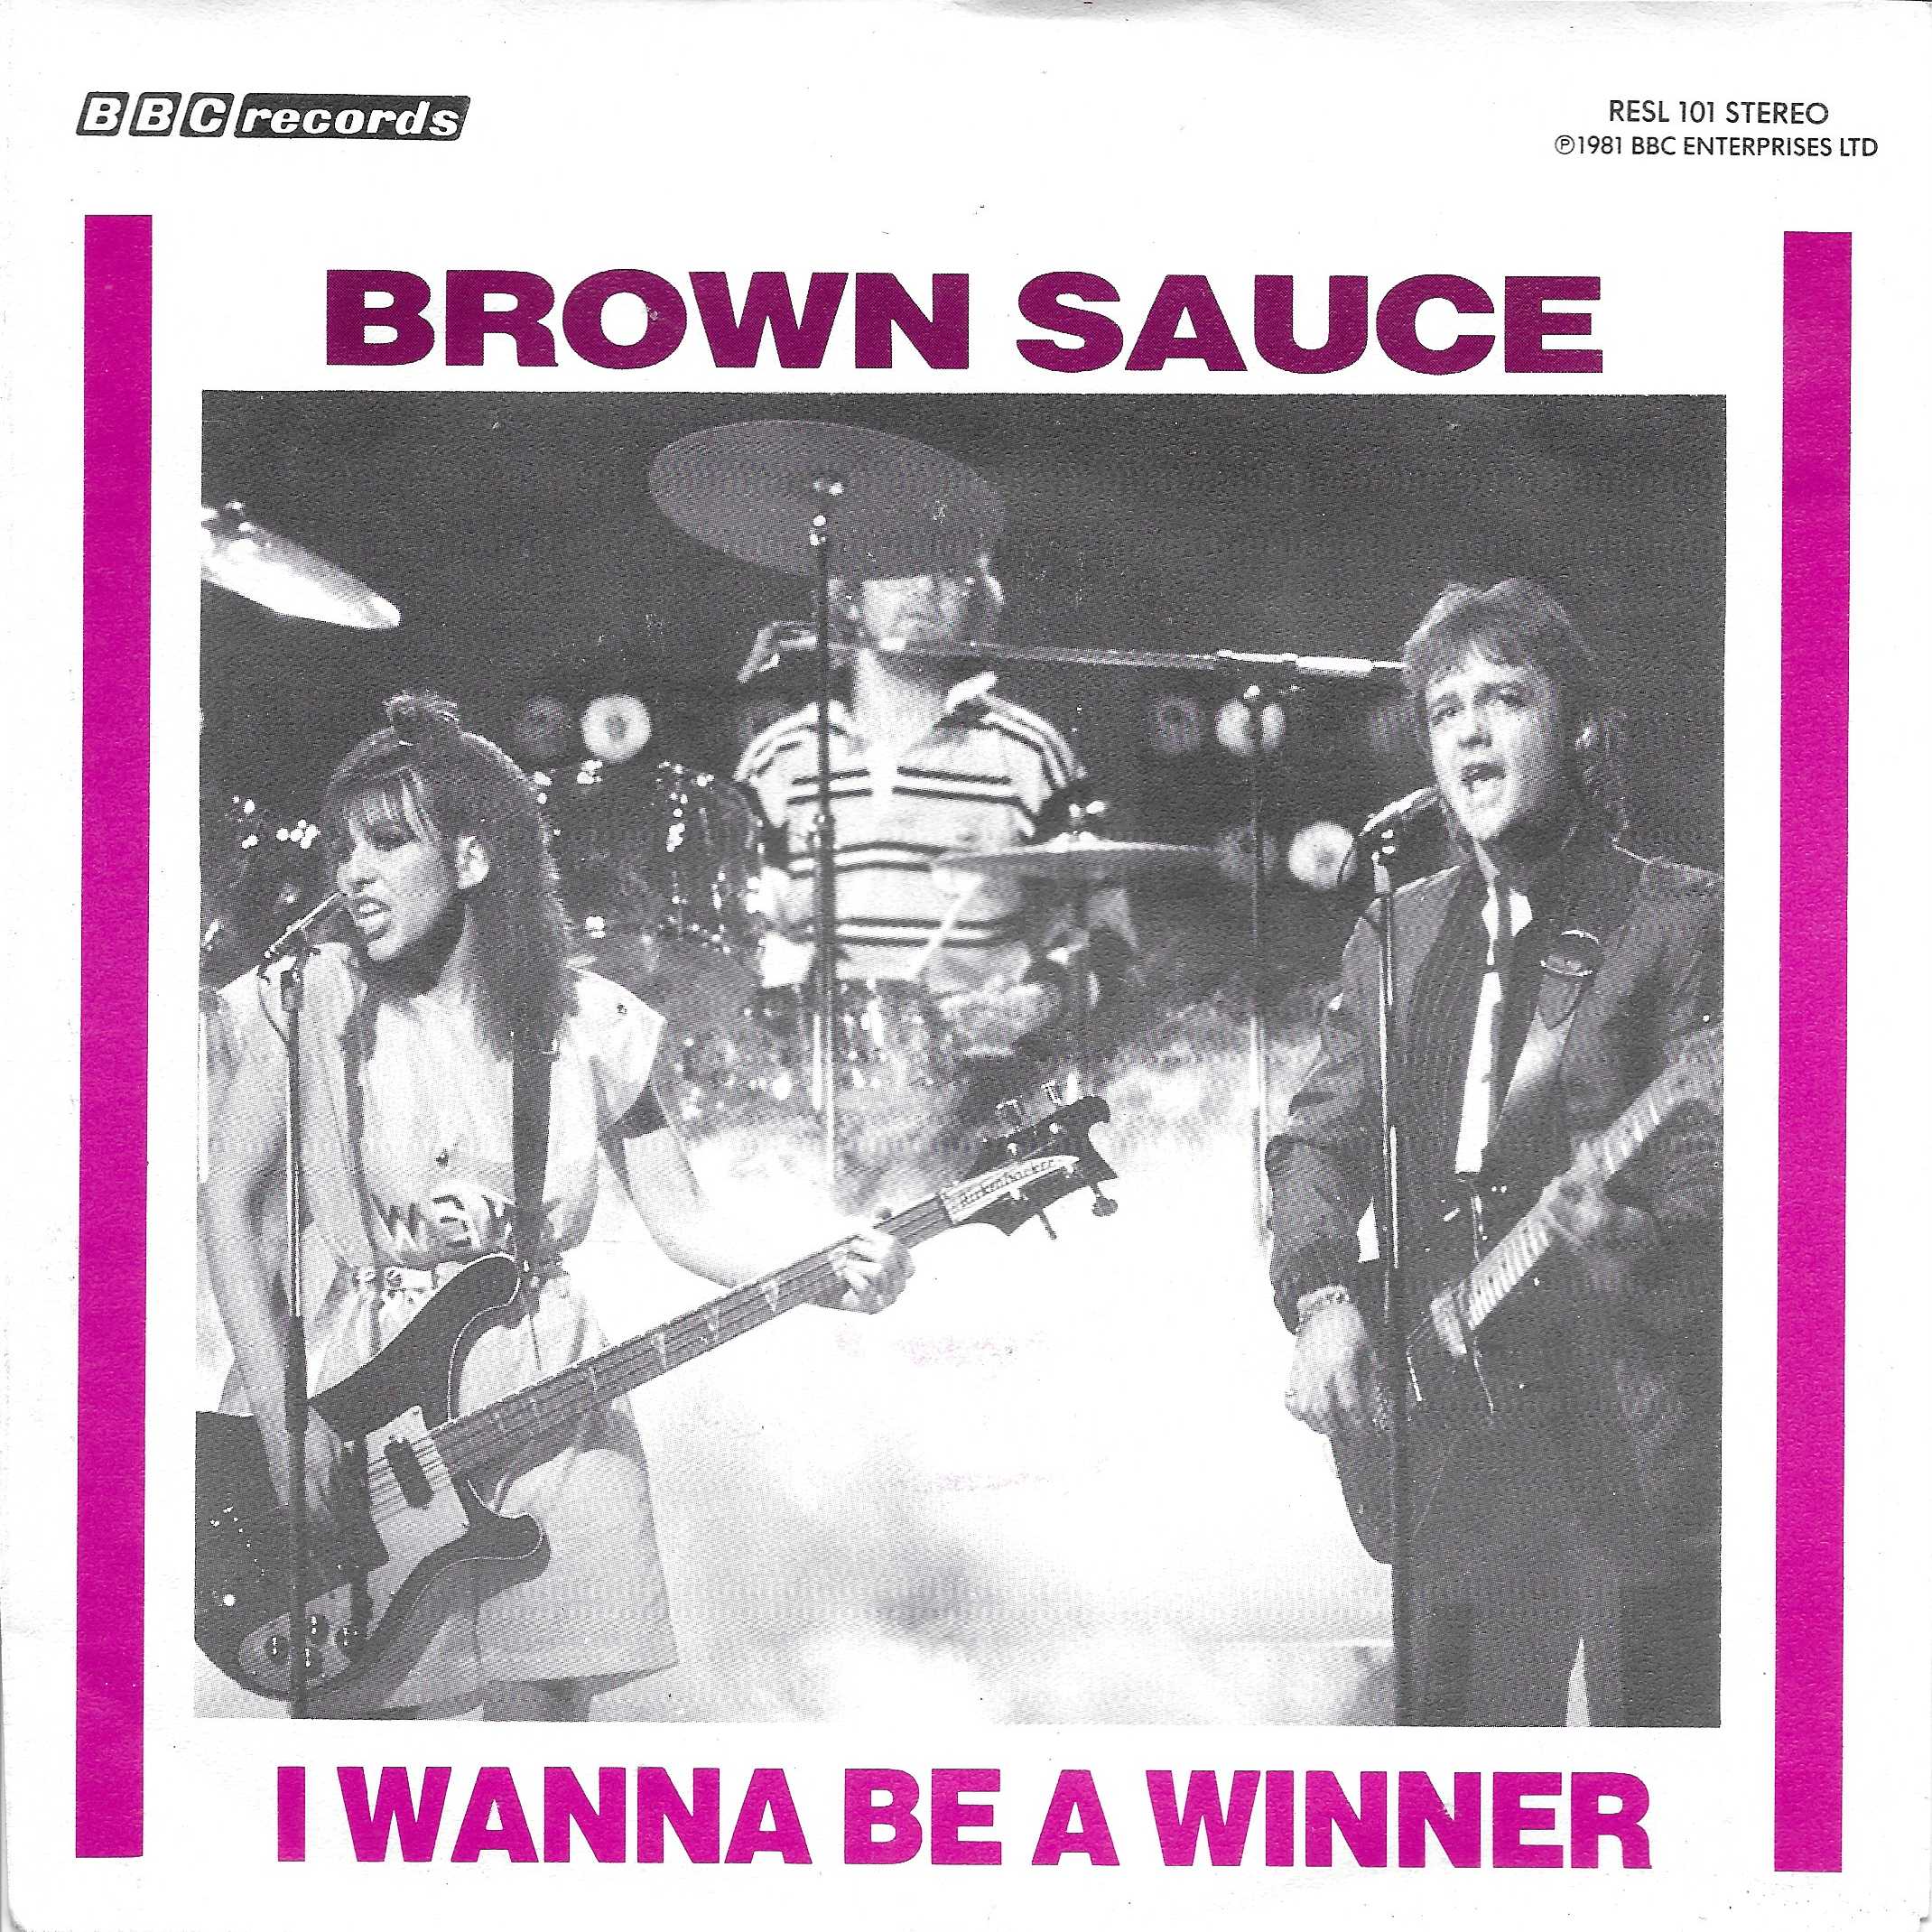 Picture of RESL 101-iD I wanna be a winner (Swap shop) (Dutch import) by artist B. A. Robertson from the BBC records and Tapes library